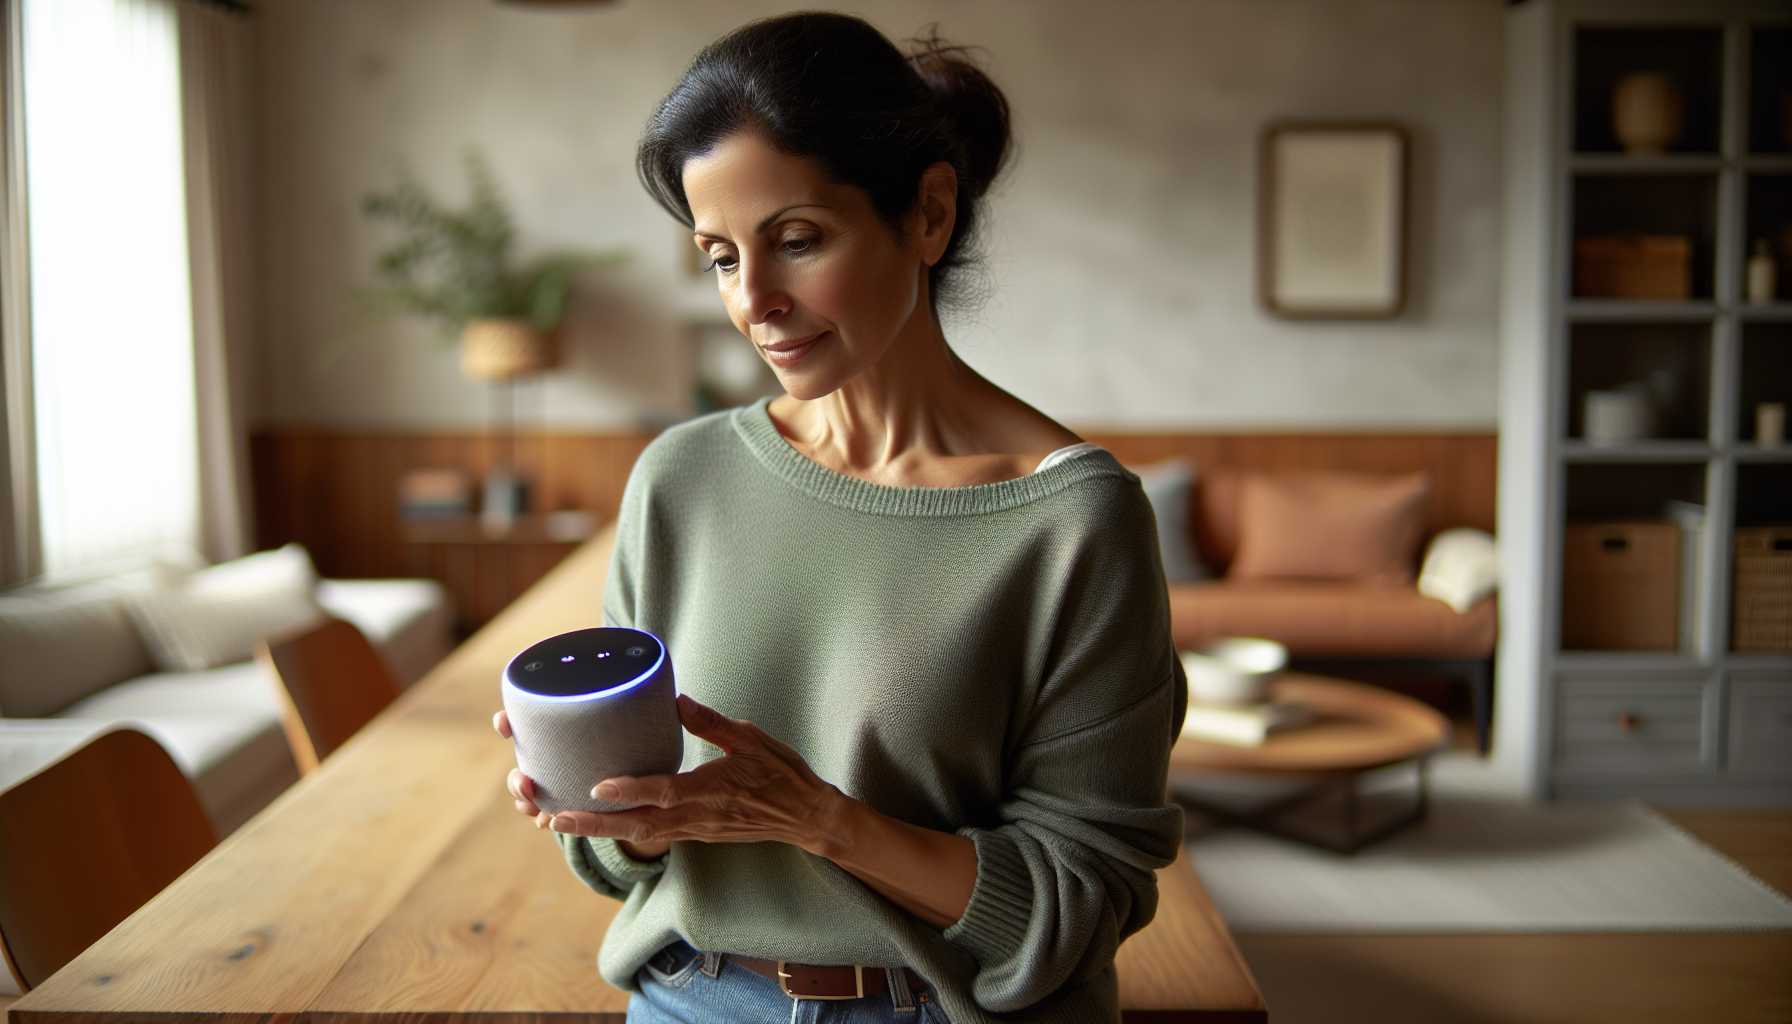 Person using a voice-activated device in their home